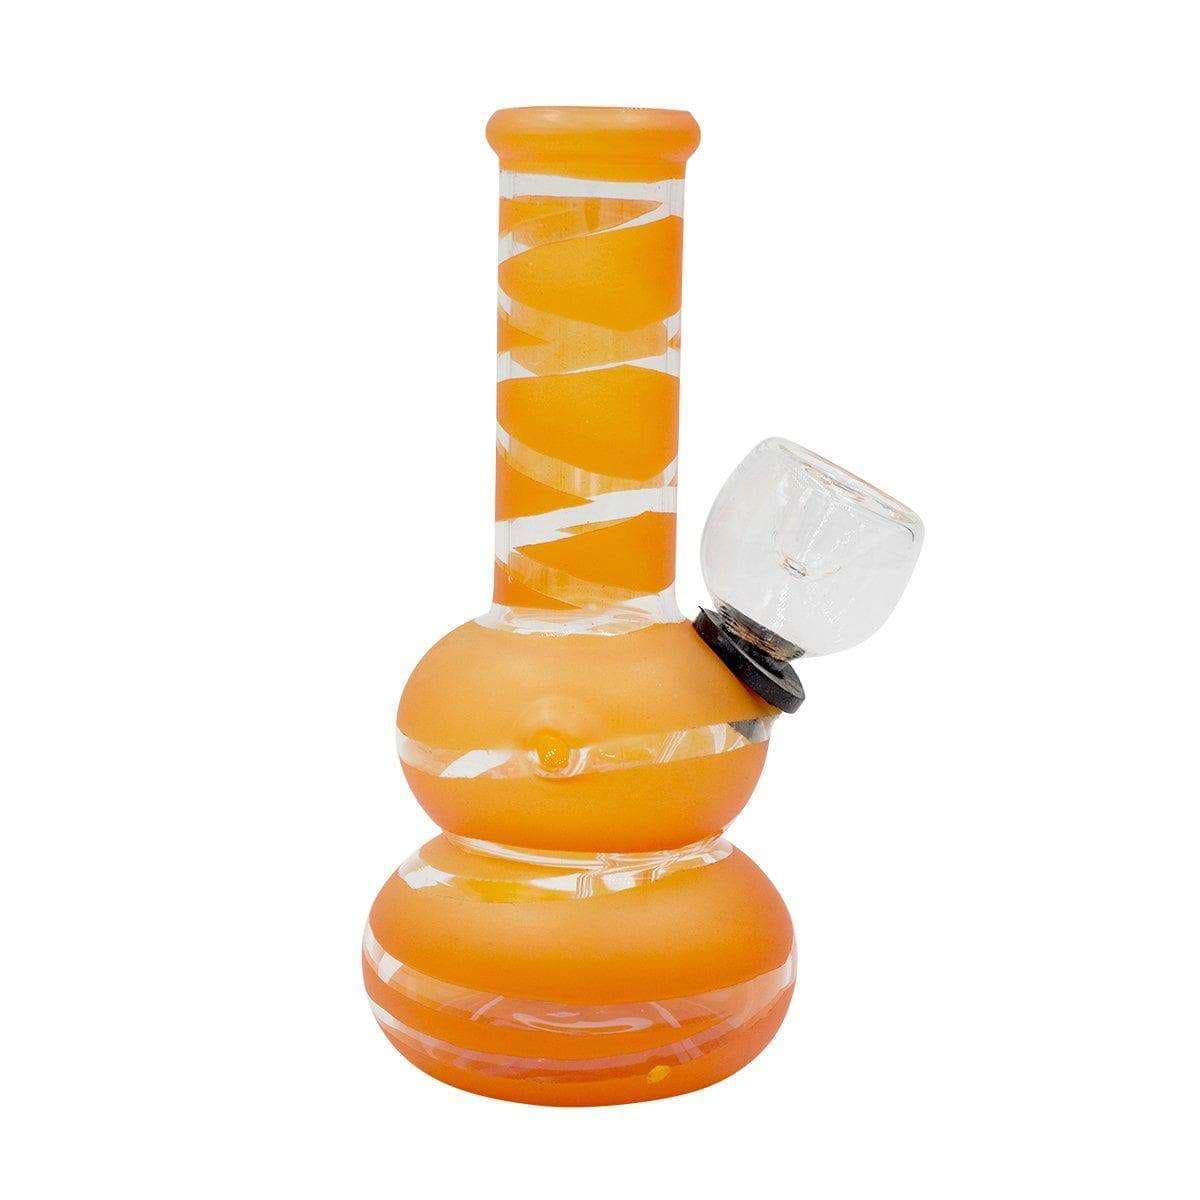 5-inch mini carb bong smoking device clear mouthpiece sleek striped design hot orange color